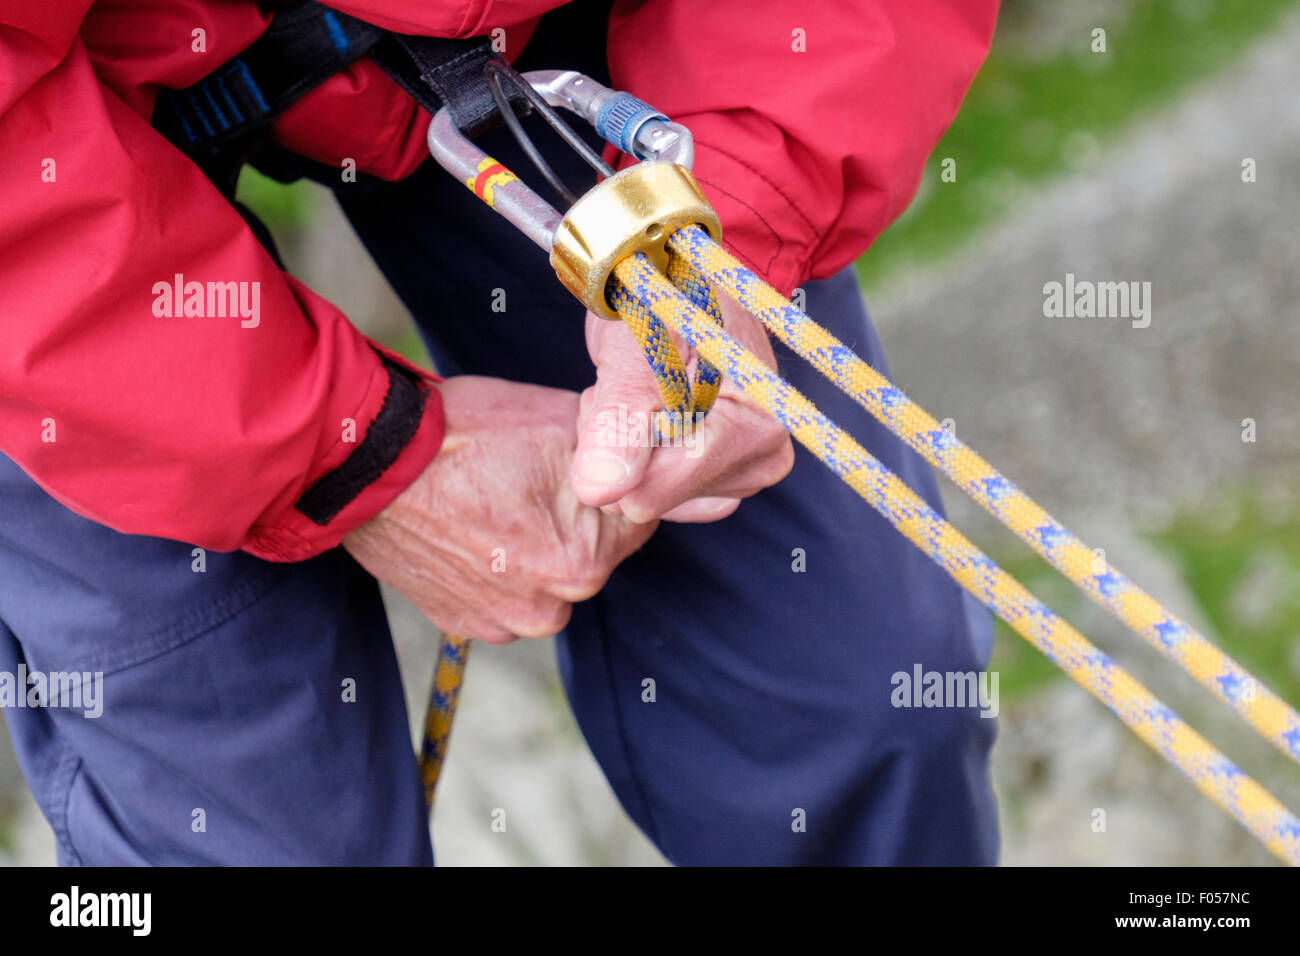 Rock climber abseiling holding a climbing safety rope and belay device rappel descender attached to harness karabiner. Wales UK Stock Photo